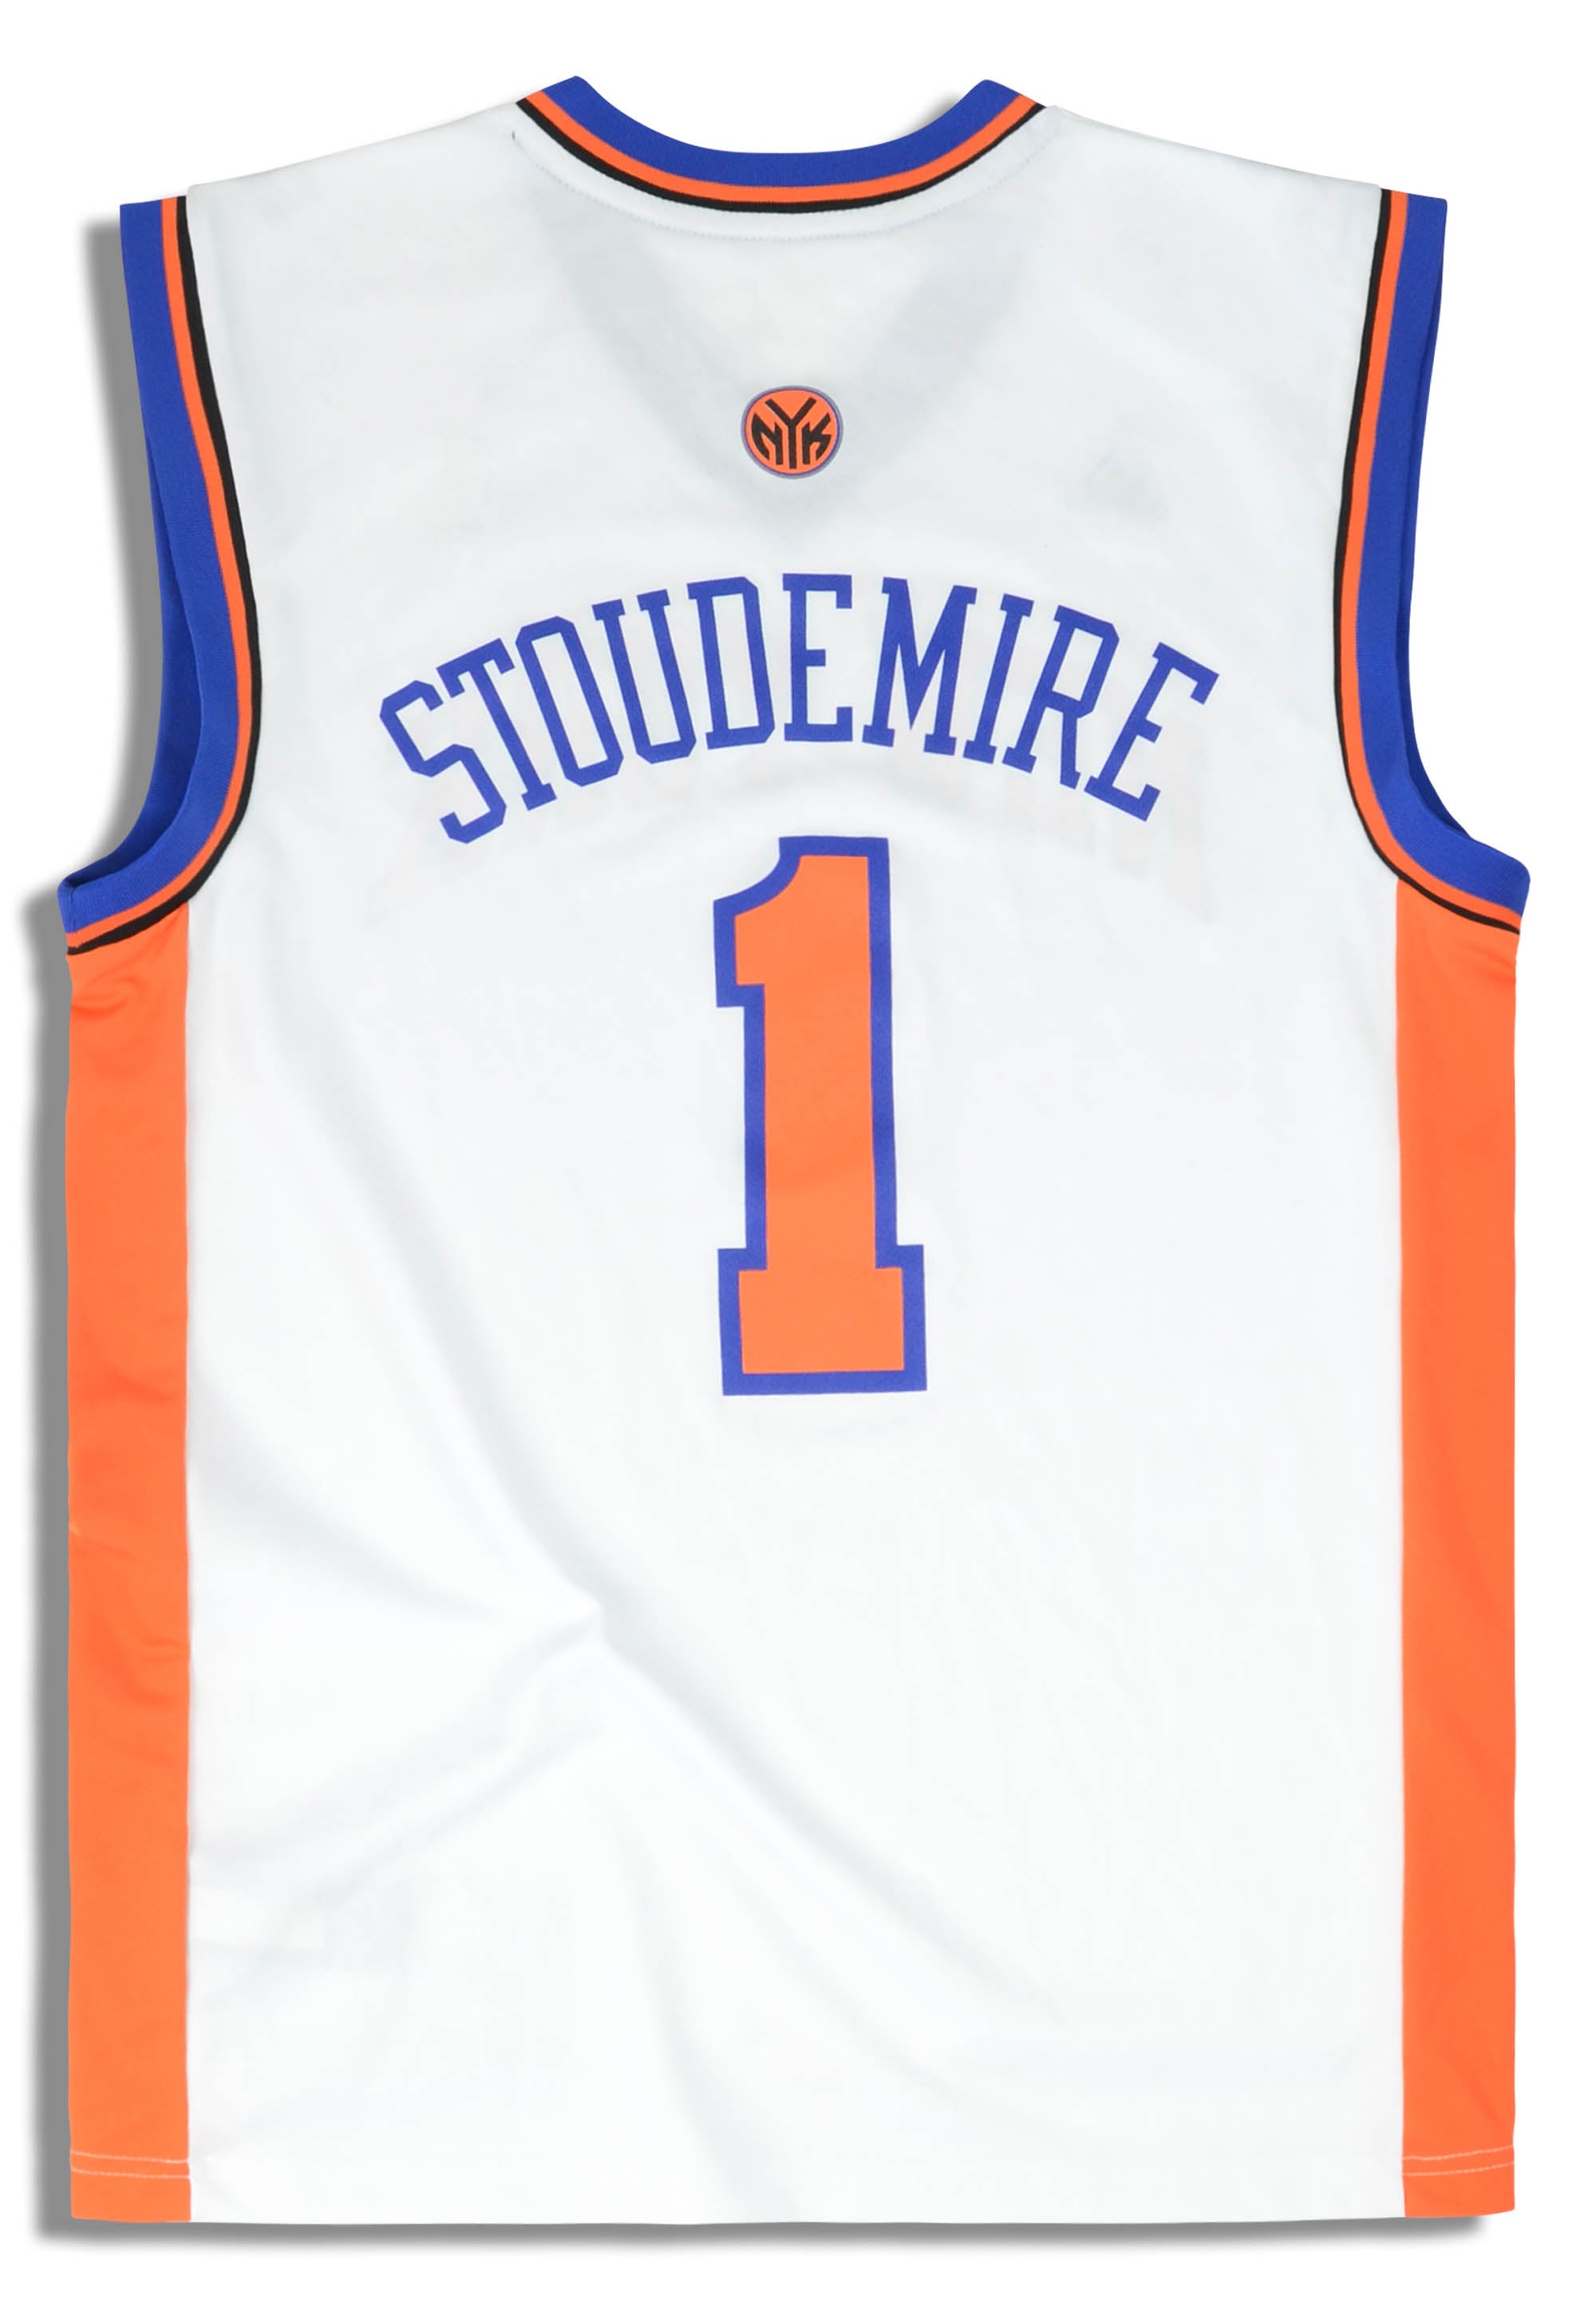 2010-12 NEW YORK KNICKS STOUDEMIRE #1 ADIDAS JERSEY (HOME) L